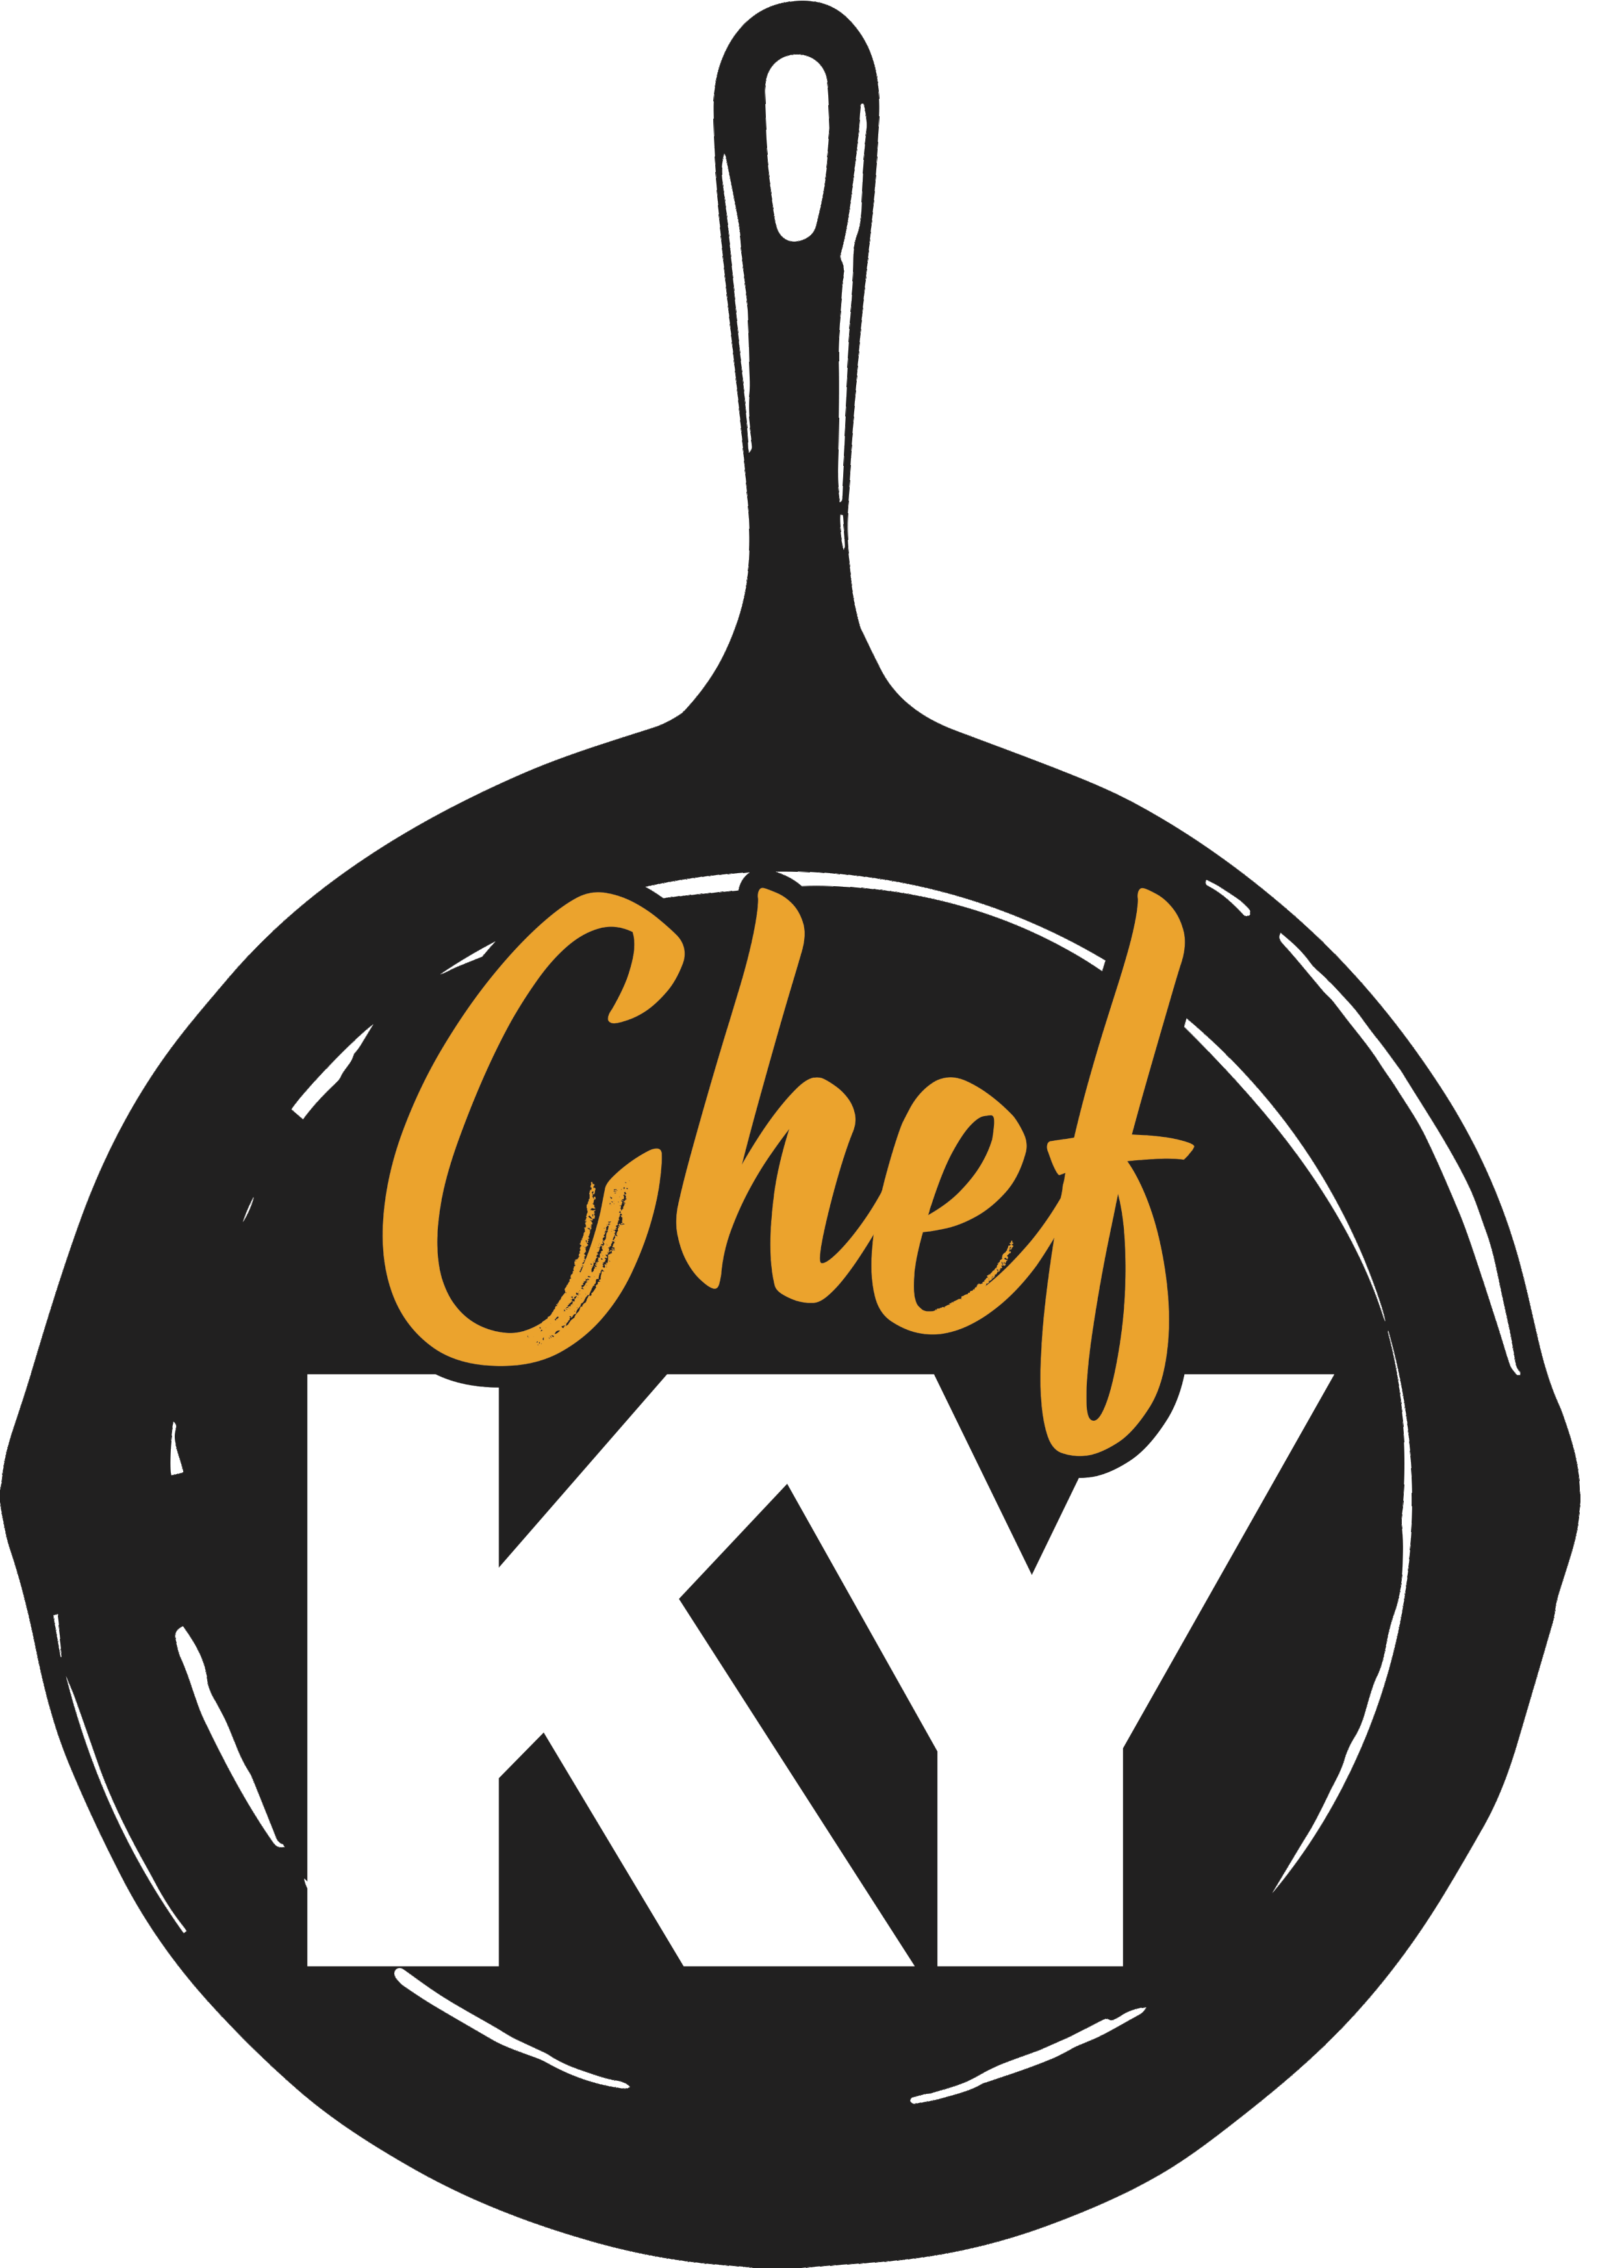 Chef Ky